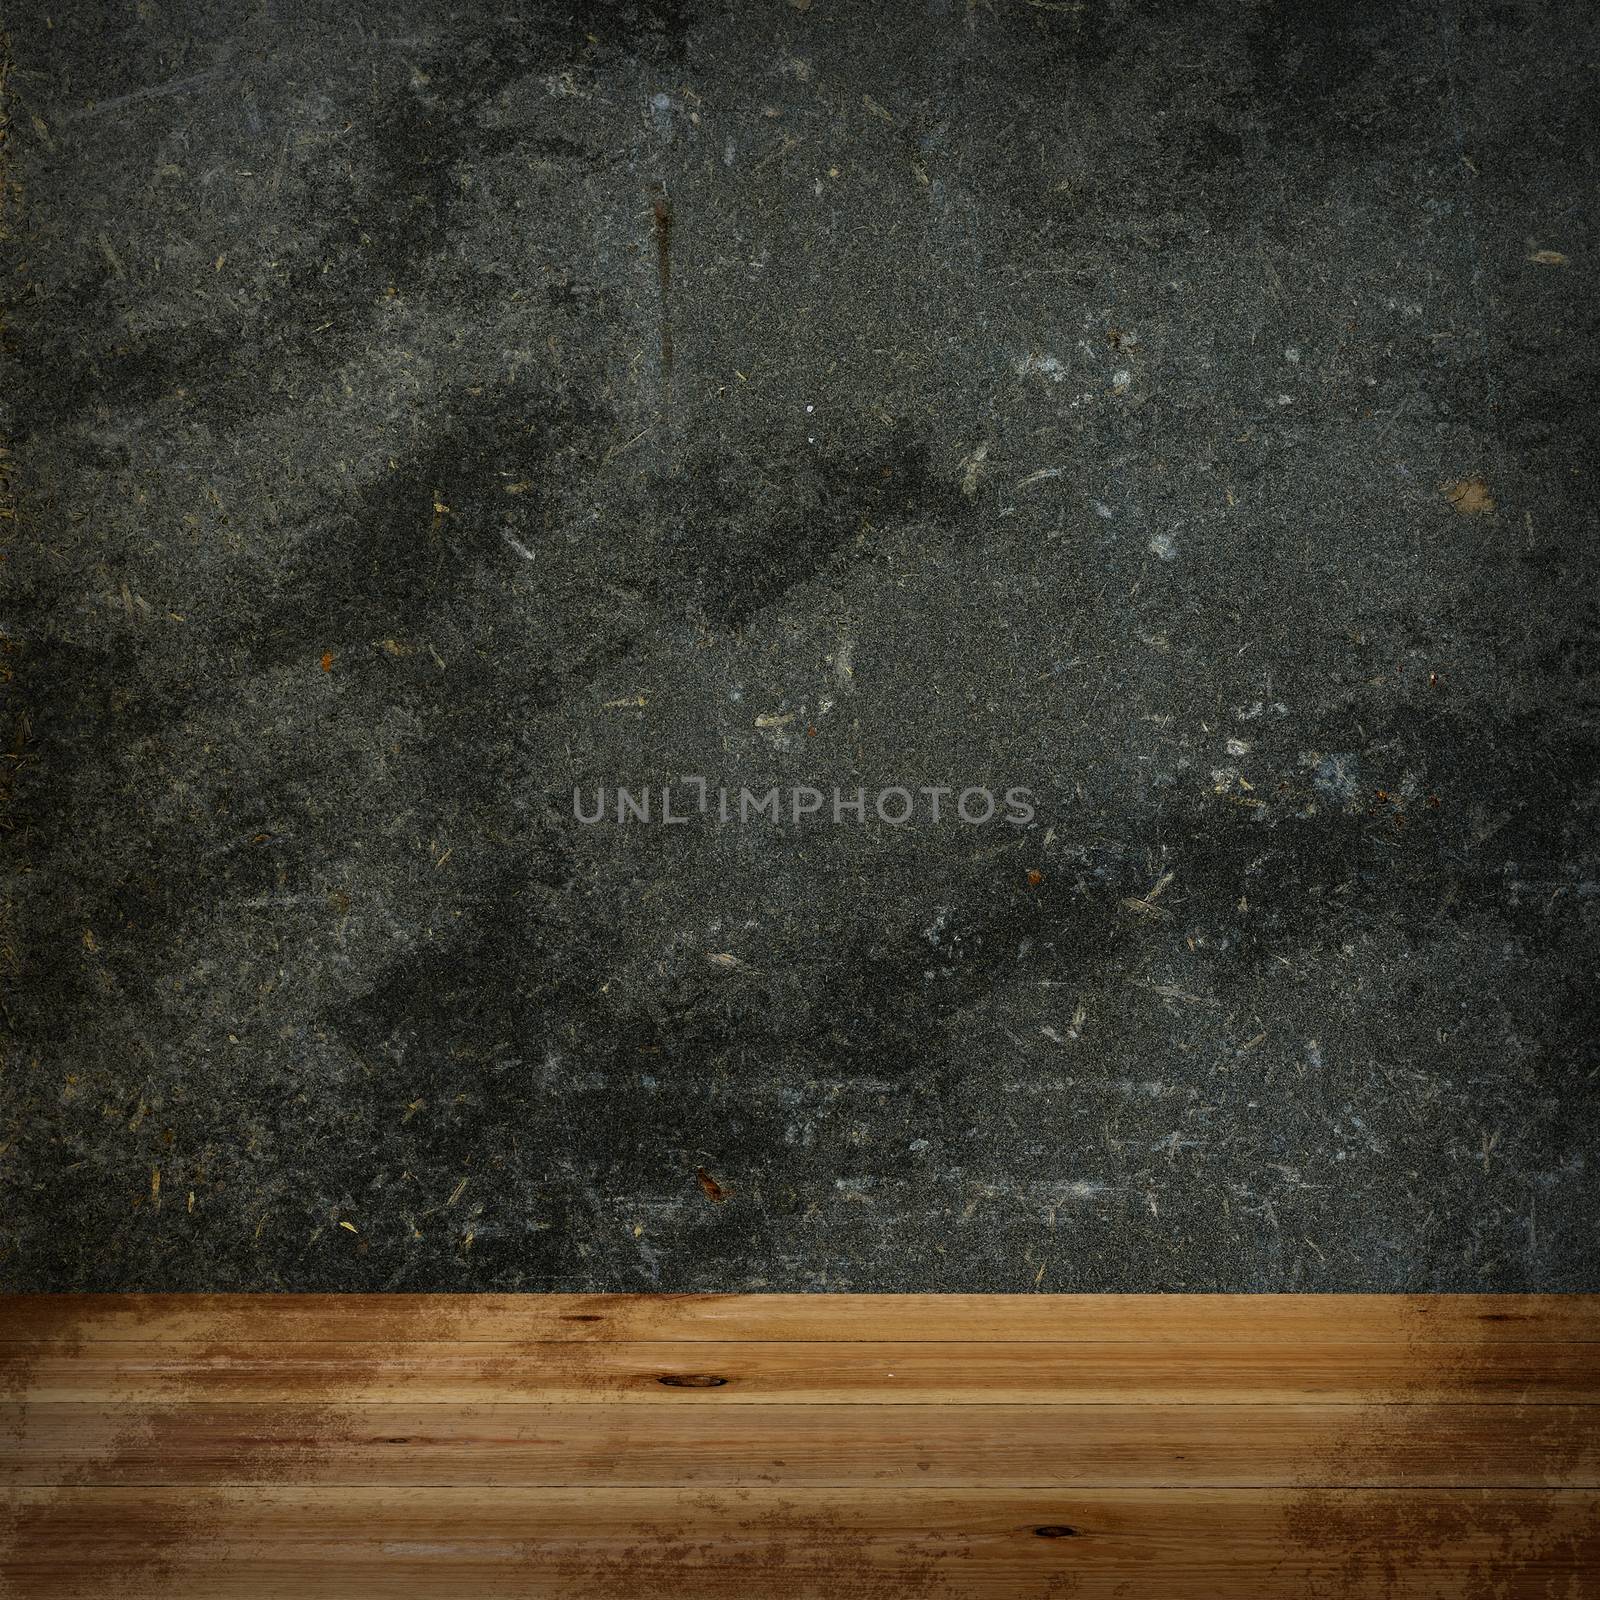 Wooden floor and concrete wall. The background in grunge style